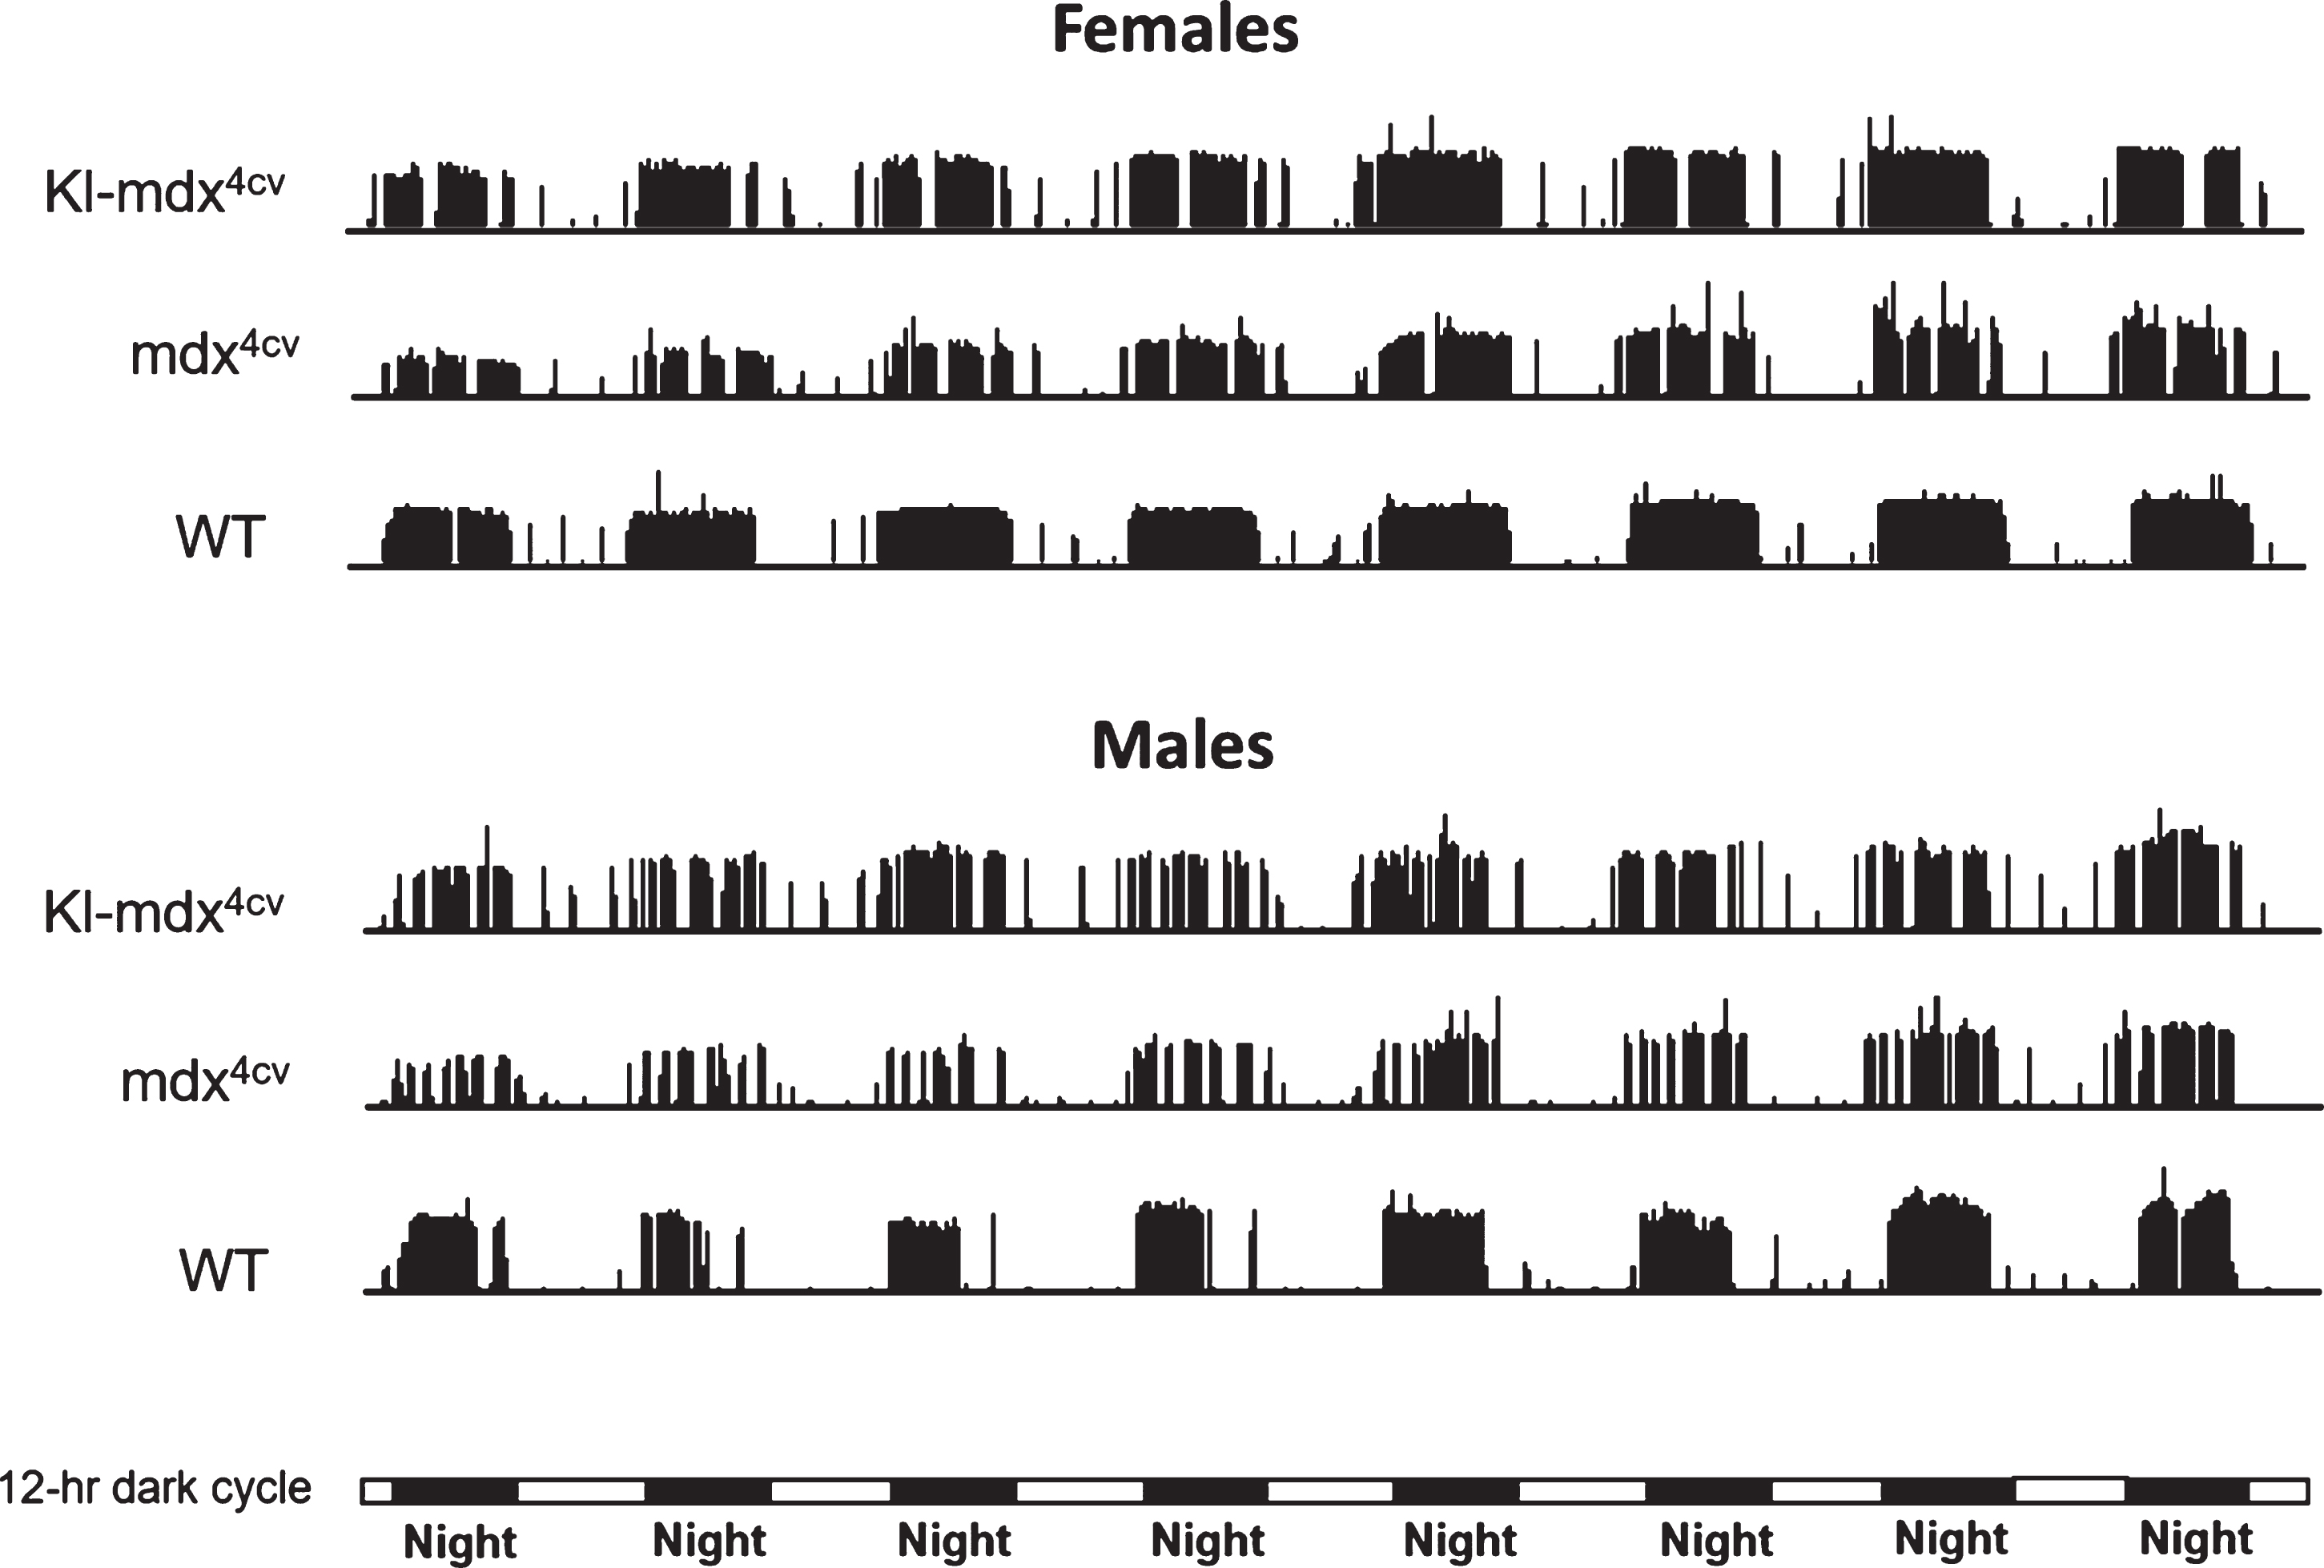 Performance actograms comparing running activity of representative Kl-mdx4cv, mdx4cv and wild type (WT) mice over 8 days of voluntary wheel running. Day and night periods are represented by horizontal light and dark bars at the bottom of the actograms. The height of each actogram bar represents the revolutions traveled during that minute of the experiment.